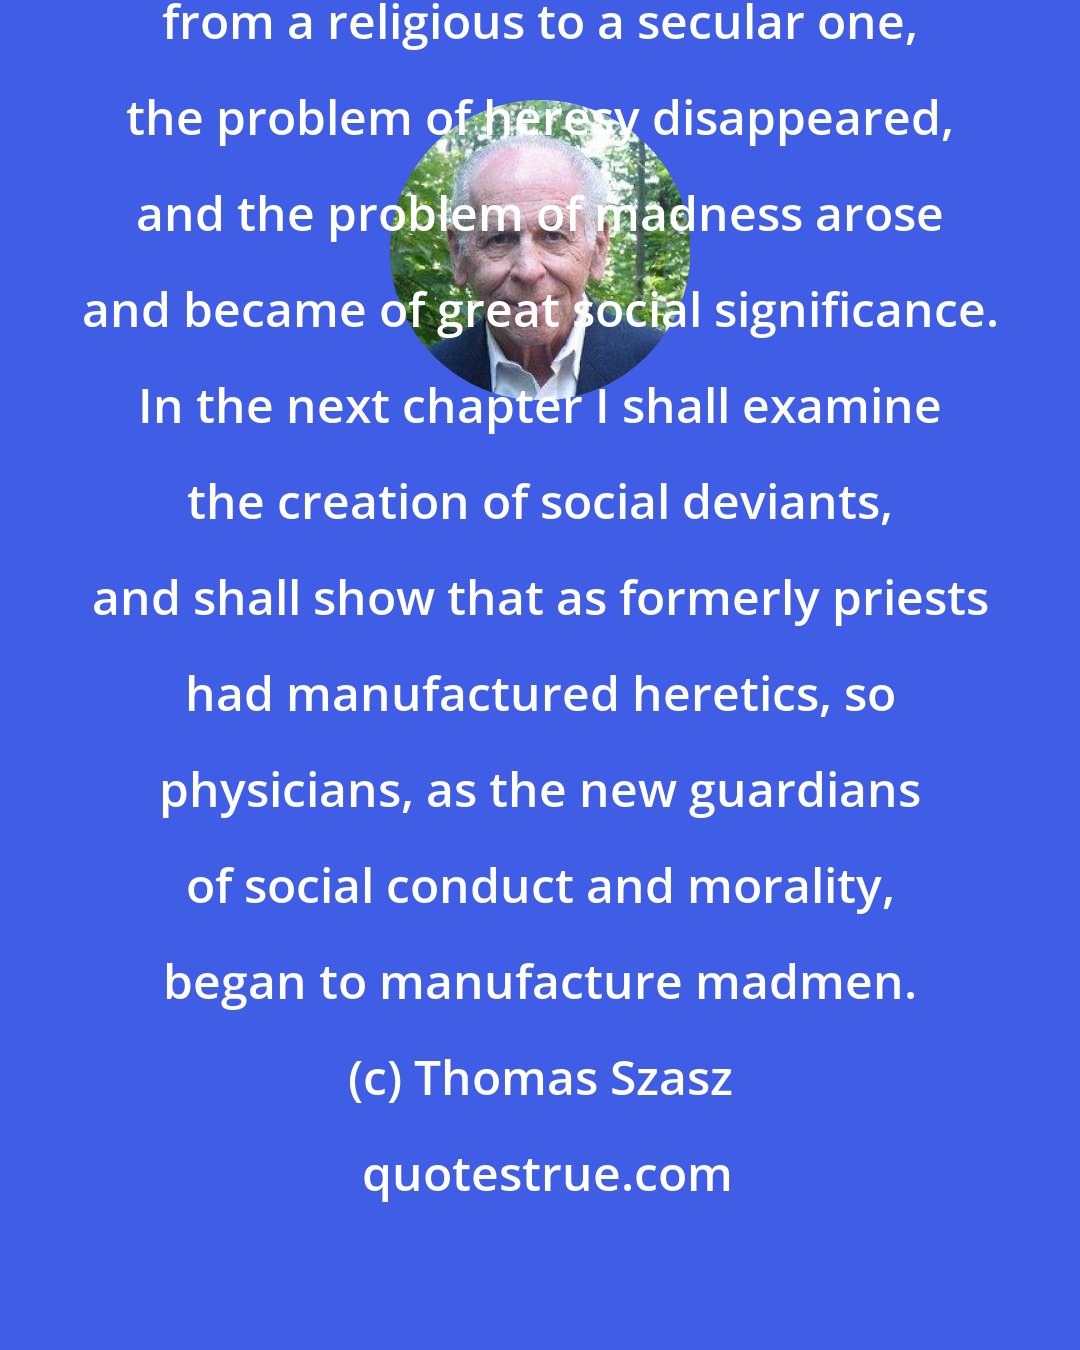 Thomas Szasz: As the dominant social ethic changed from a religious to a secular one, the problem of heresy disappeared, and the problem of madness arose and became of great social significance. In the next chapter I shall examine the creation of social deviants, and shall show that as formerly priests had manufactured heretics, so physicians, as the new guardians of social conduct and morality, began to manufacture madmen.